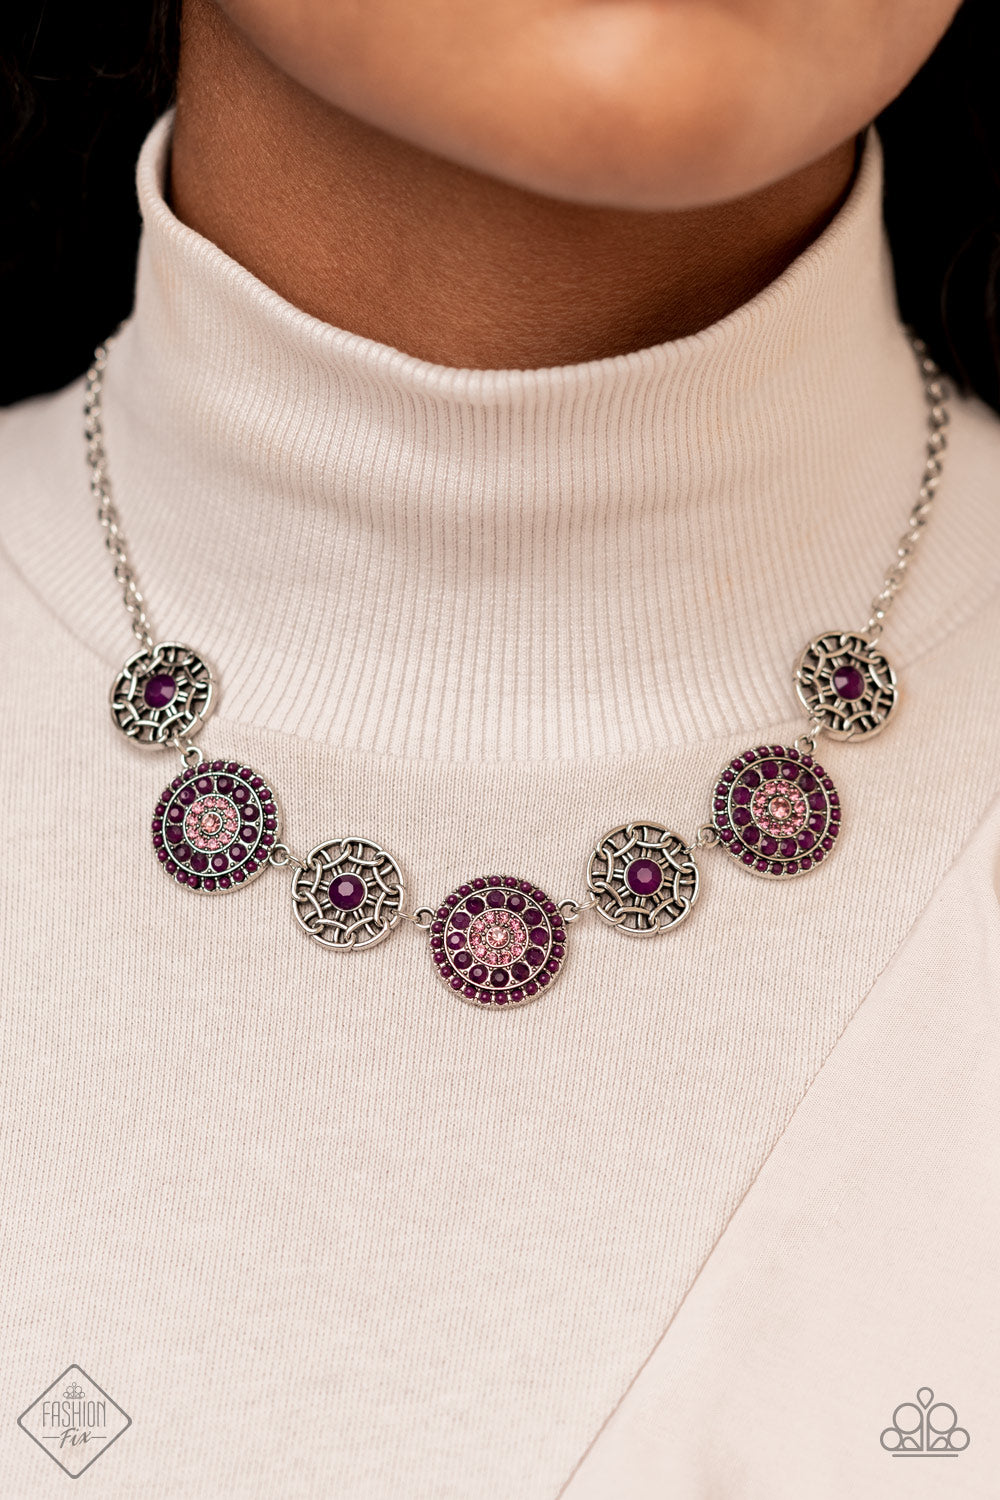 Farmers Market Fashionista - Purple - Plum - Amethyst Necklace - Paparazzi Accessories - Bursts of faceted plum beads and sparkling light amethyst rhinestones radiate from the centers of antiqued silver frames, while smaller airy frames are dotted with plum centers. The whimsical designs alternate around the collar making a dazzling display. Features an adjustable clasp closure. Sold as one individual necklace.